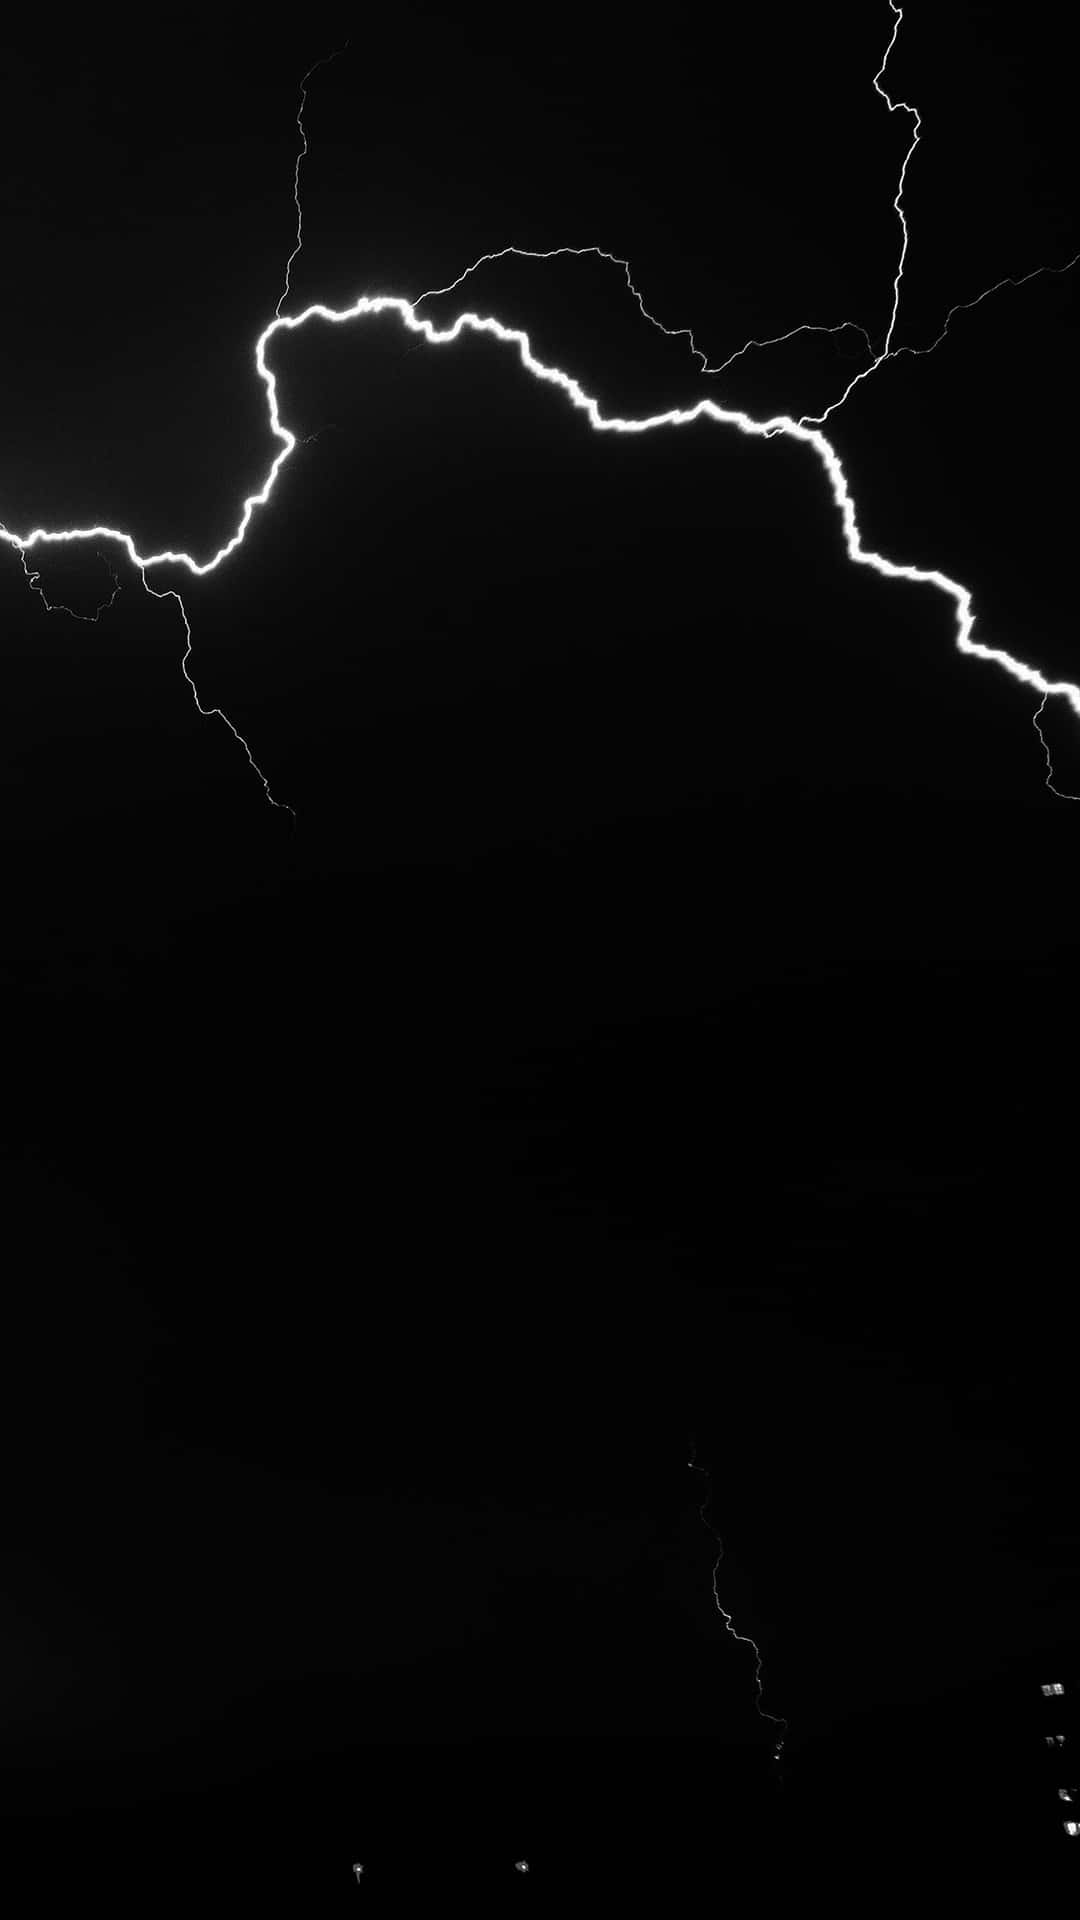 Powerful Black and White Storm Wallpaper